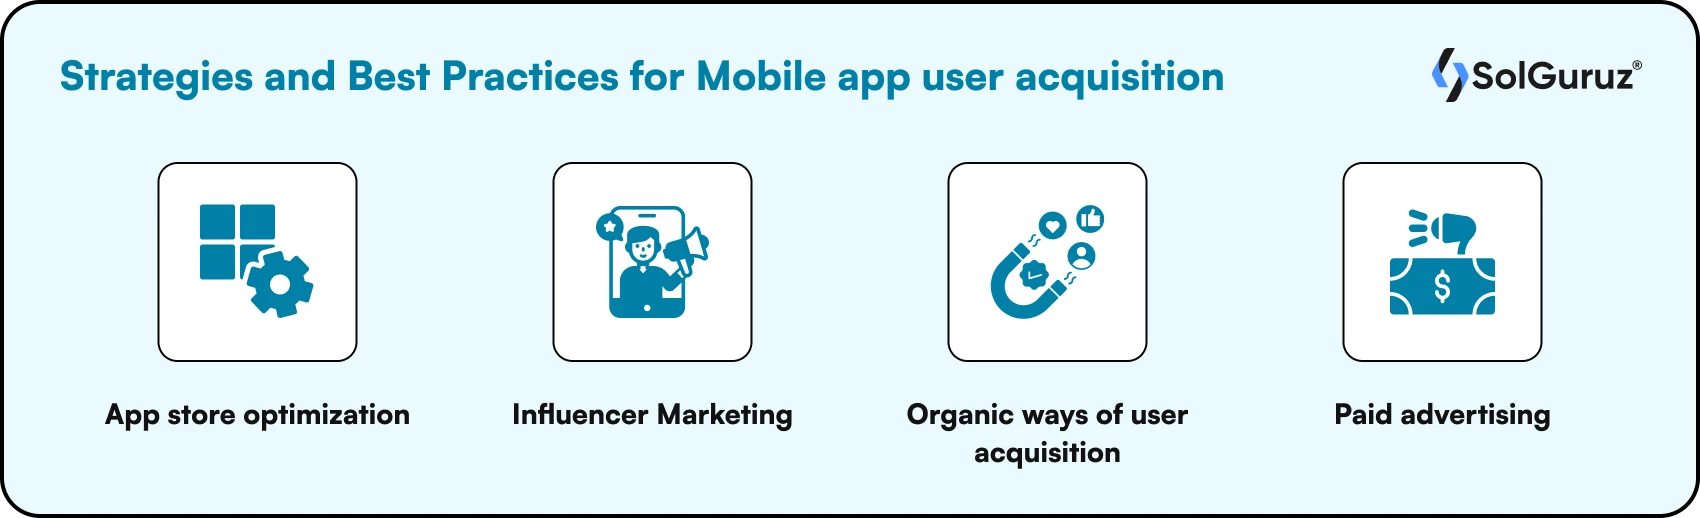 Strategies and Best Practices for Mobile app user acquisition